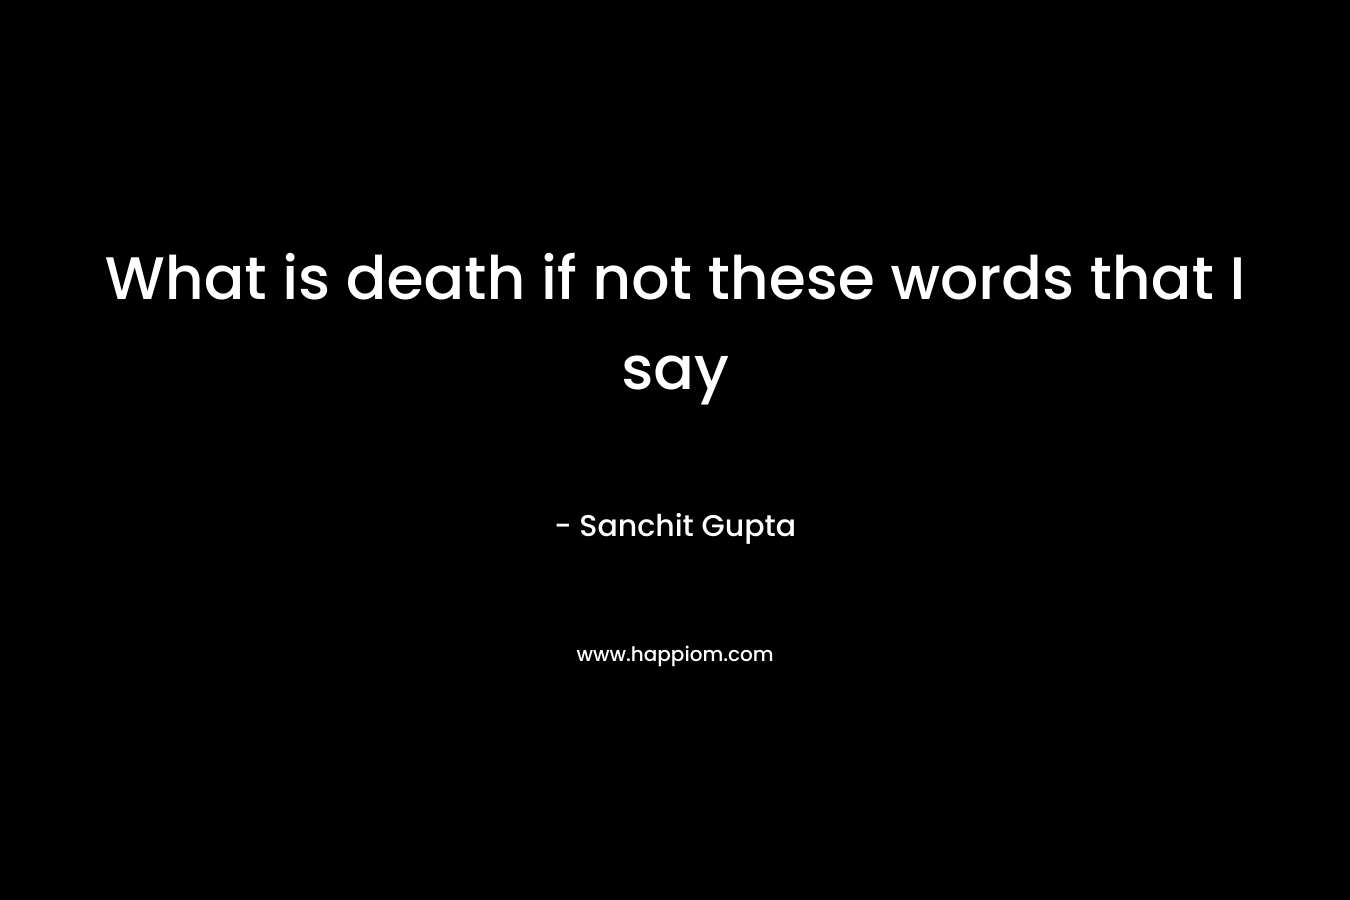 What is death if not these words that I say – Sanchit Gupta